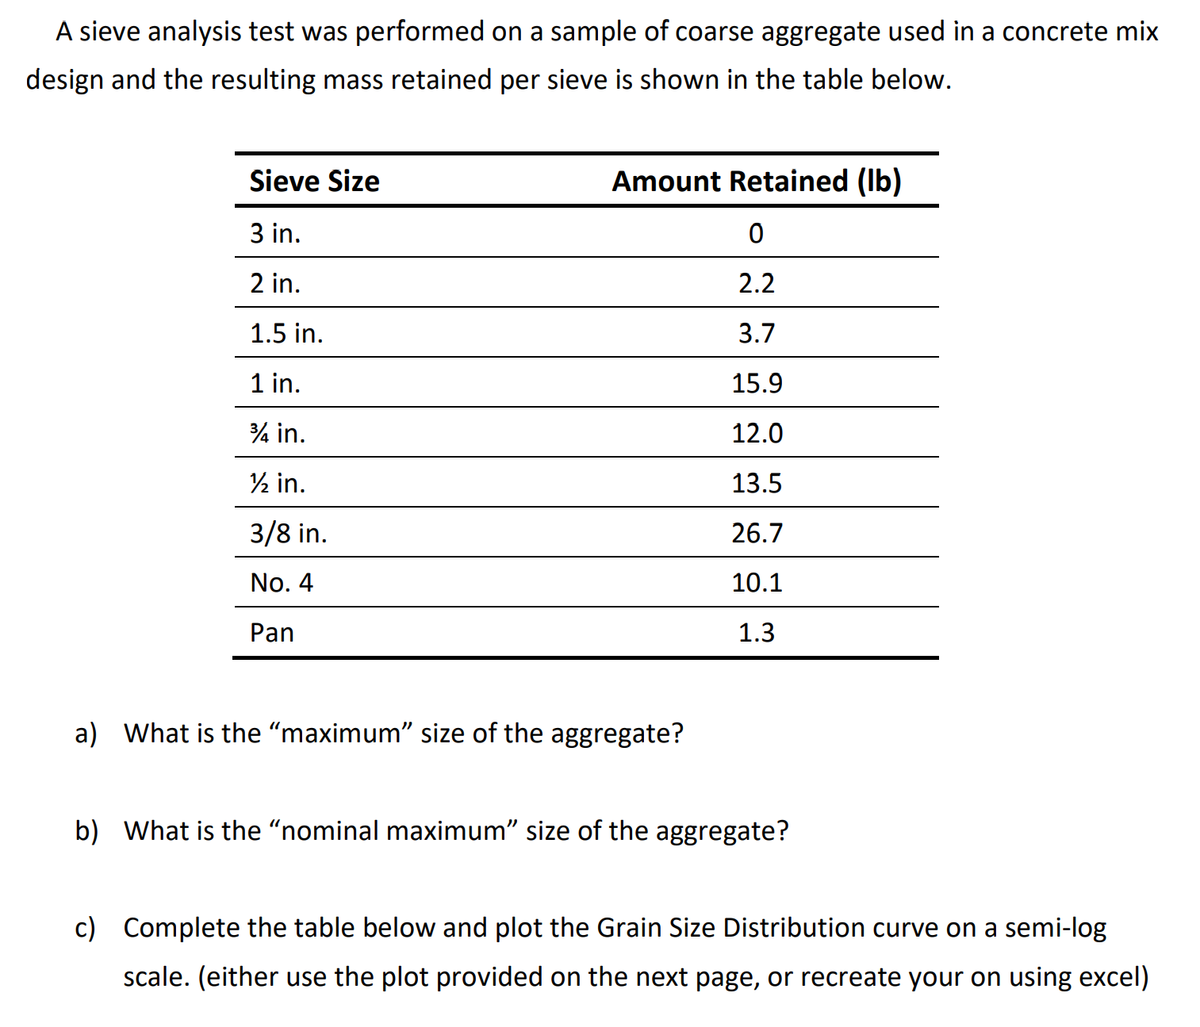 A sieve analysis test was performed on a sample of coarse aggregate used in a concrete mix
design and the resulting mass retained per sieve is shown in the table below.
Sieve Size
3 in.
2 in.
1.5 in.
1 in.
¾ in.
½ in.
3/8 in.
No. 4
Pan
Amount Retained (lb)
0
2.2
3.7
15.9
12.0
13.5
26.7
10.1
1.3
a) What is the "maximum" size of the aggregate?
b) What is the "nominal maximum" size of the aggregate?
c) Complete the table below and plot the Grain Size Distribution curve on a semi-log
scale. (either use the plot provided on the next page, or recreate your on using excel)